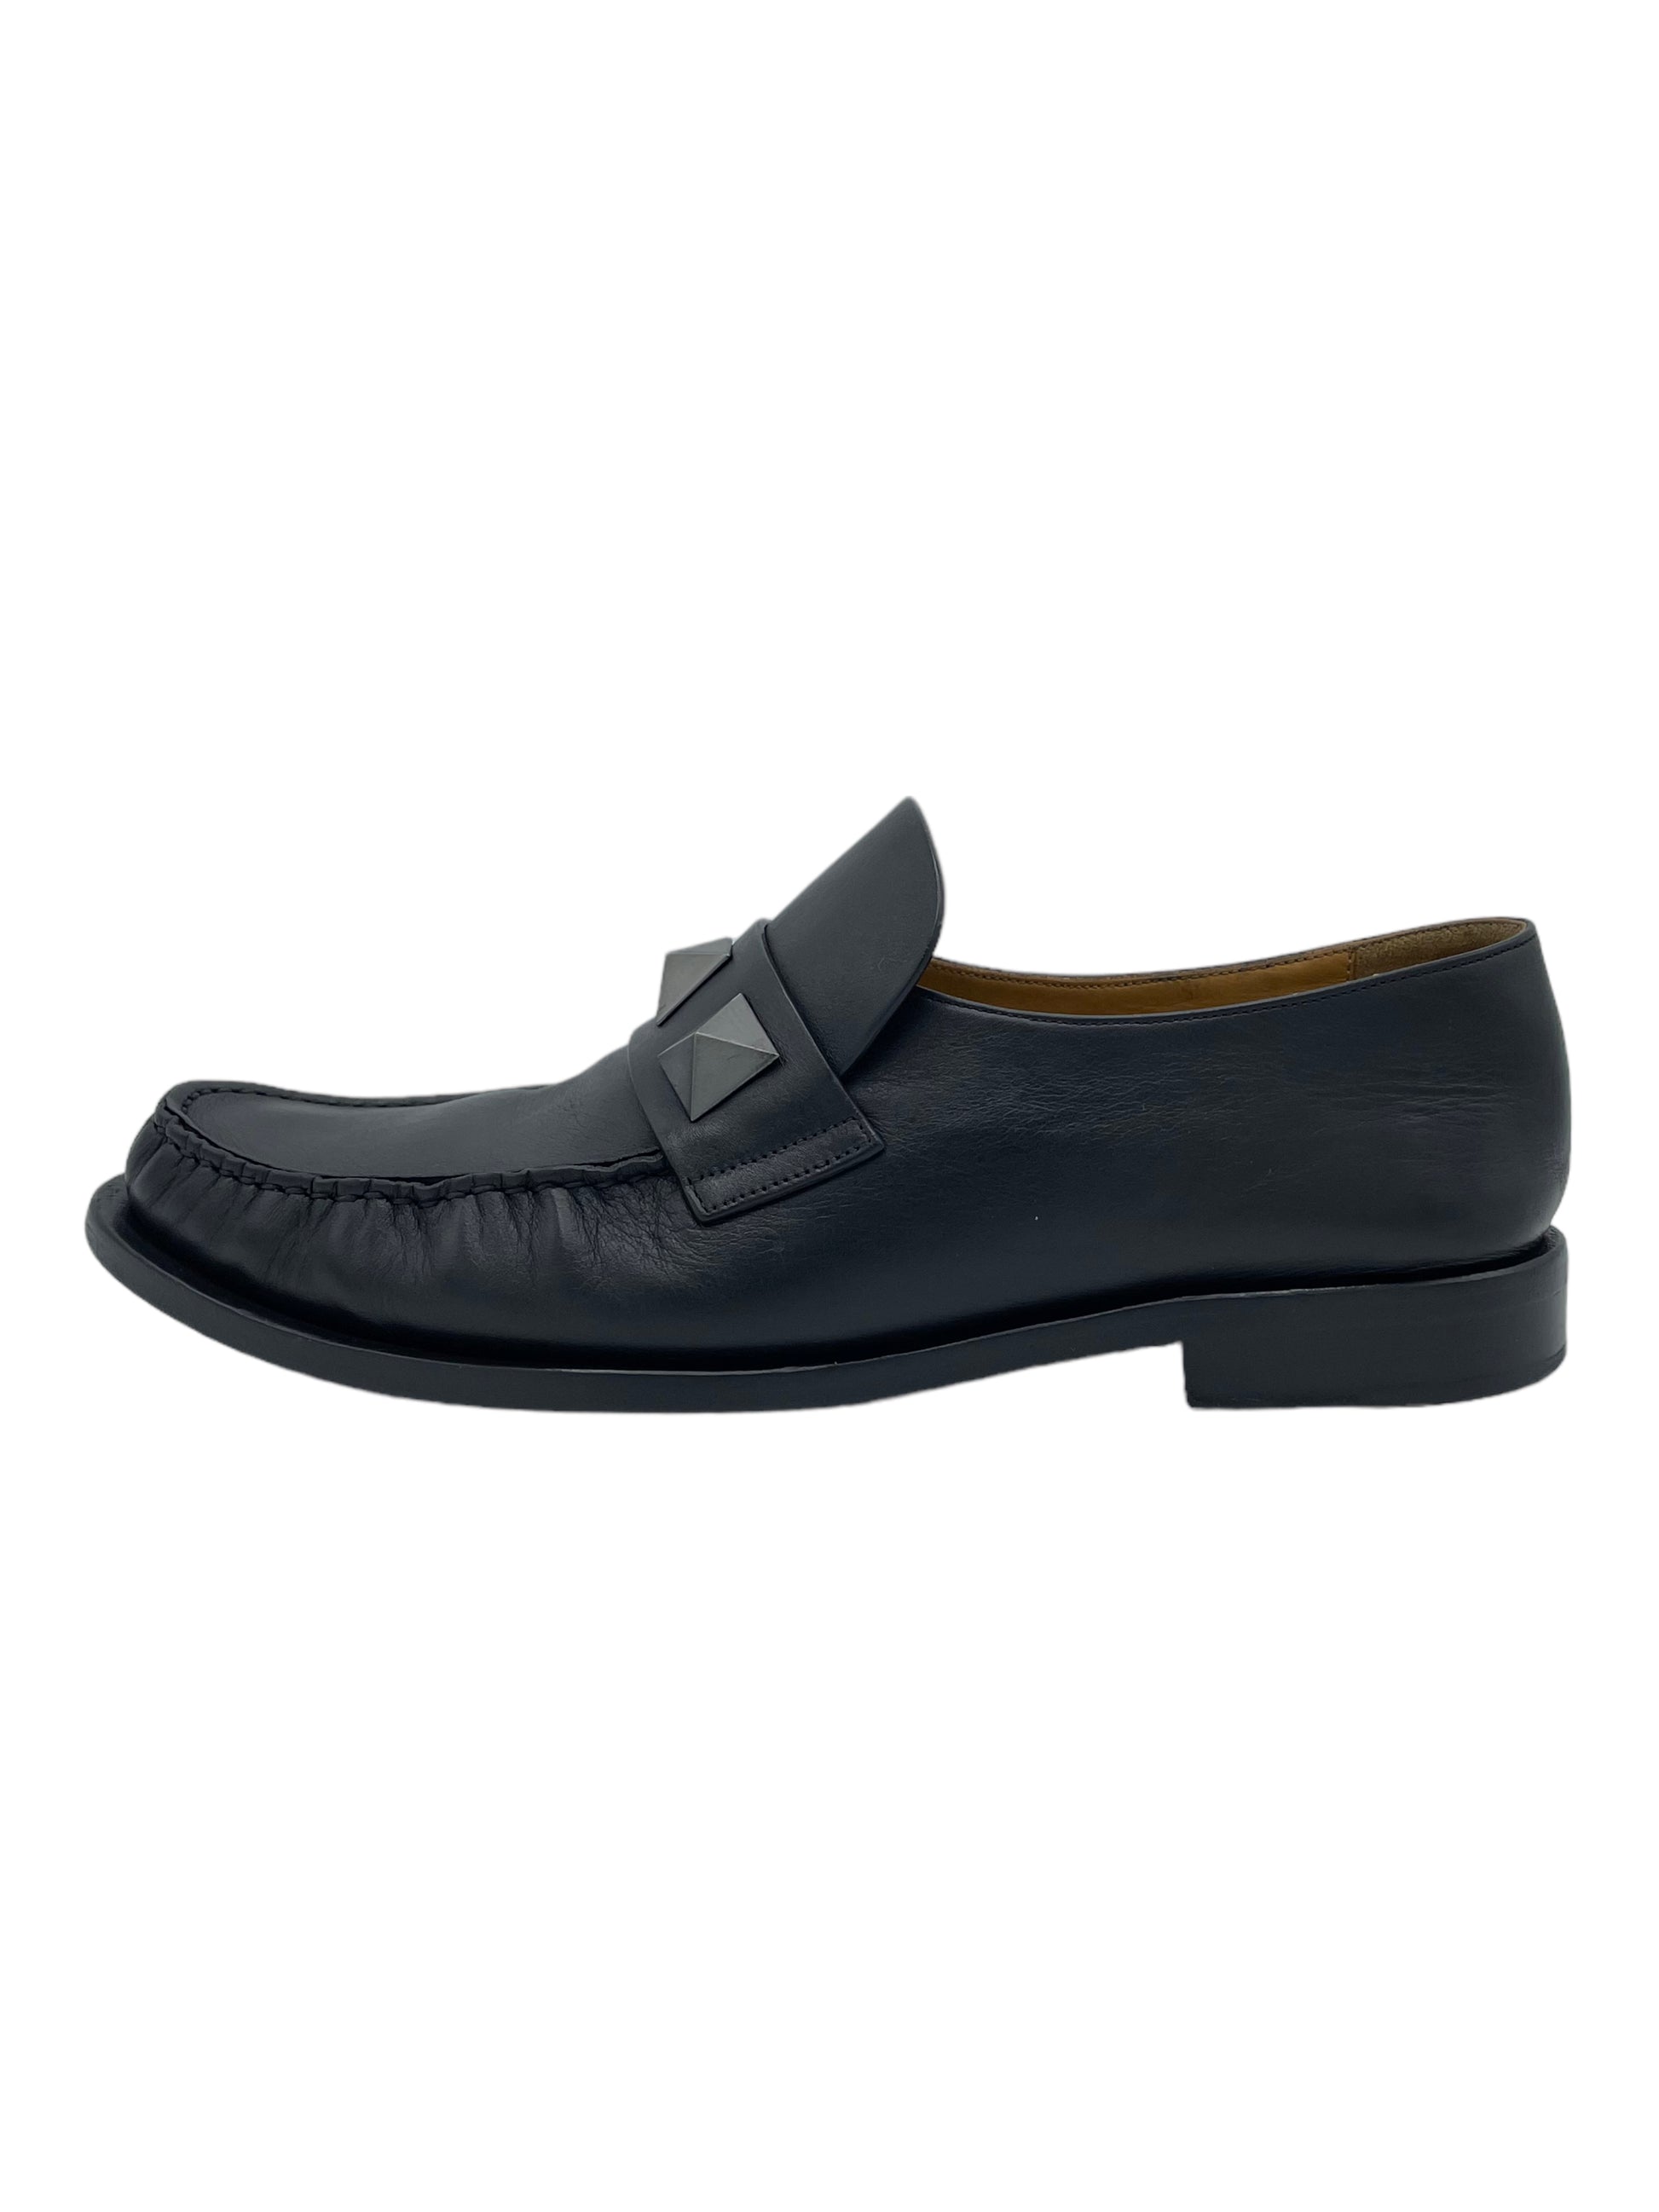 Valentino Black Stud Loafers - Genuine Design Luxury Consignment for Men. New & Pre-Owned Clothing, Shoes, & Accessories. Calgary, Canada